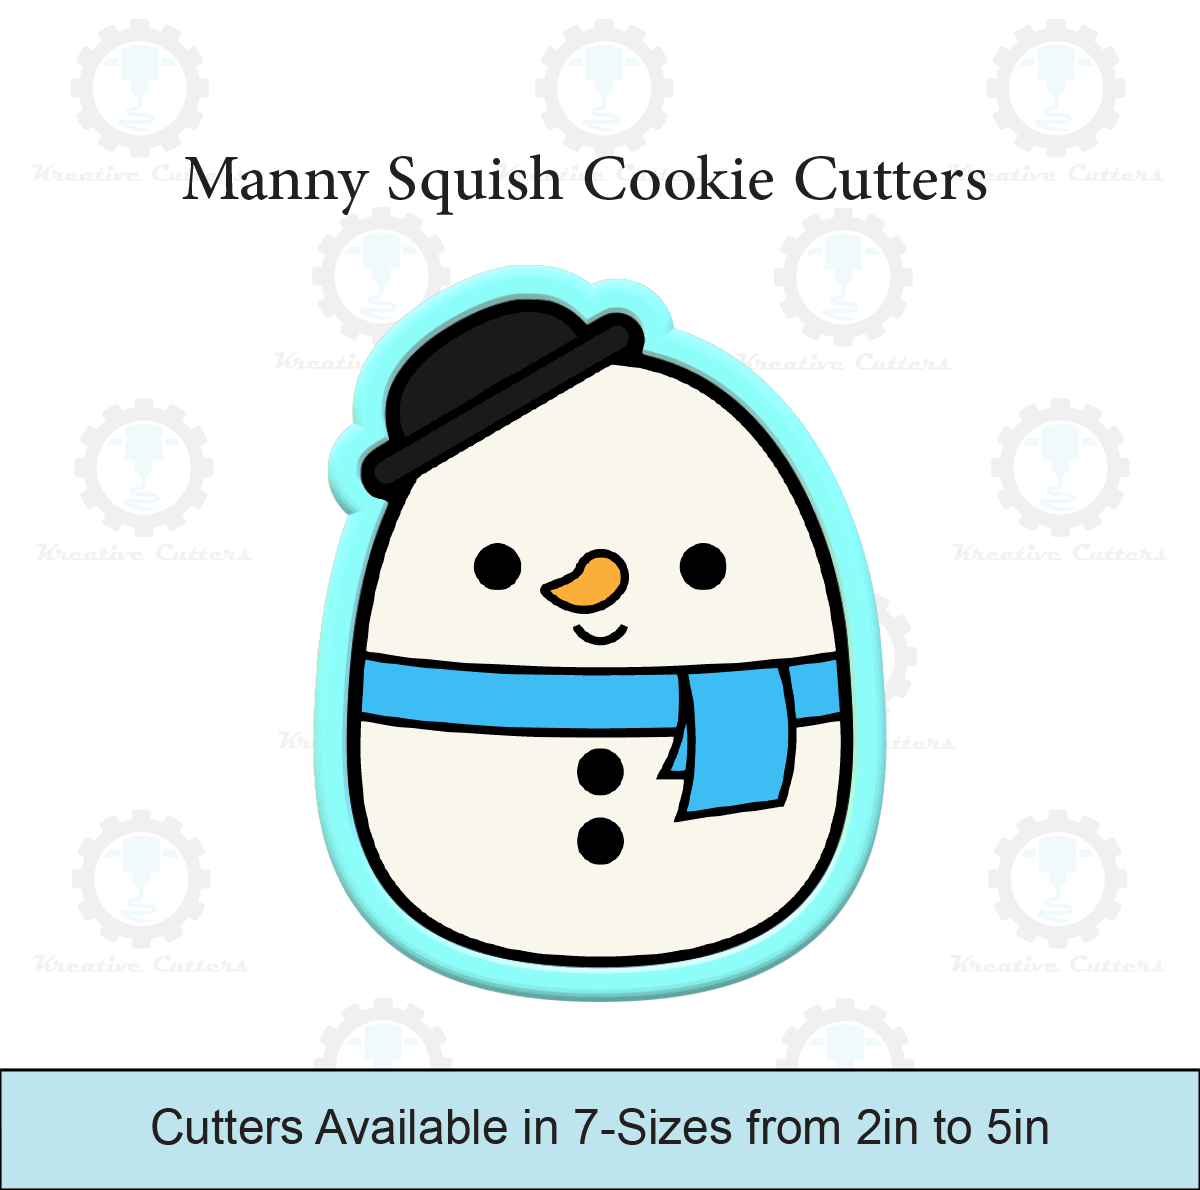 Manny Squish Cookie Cutters